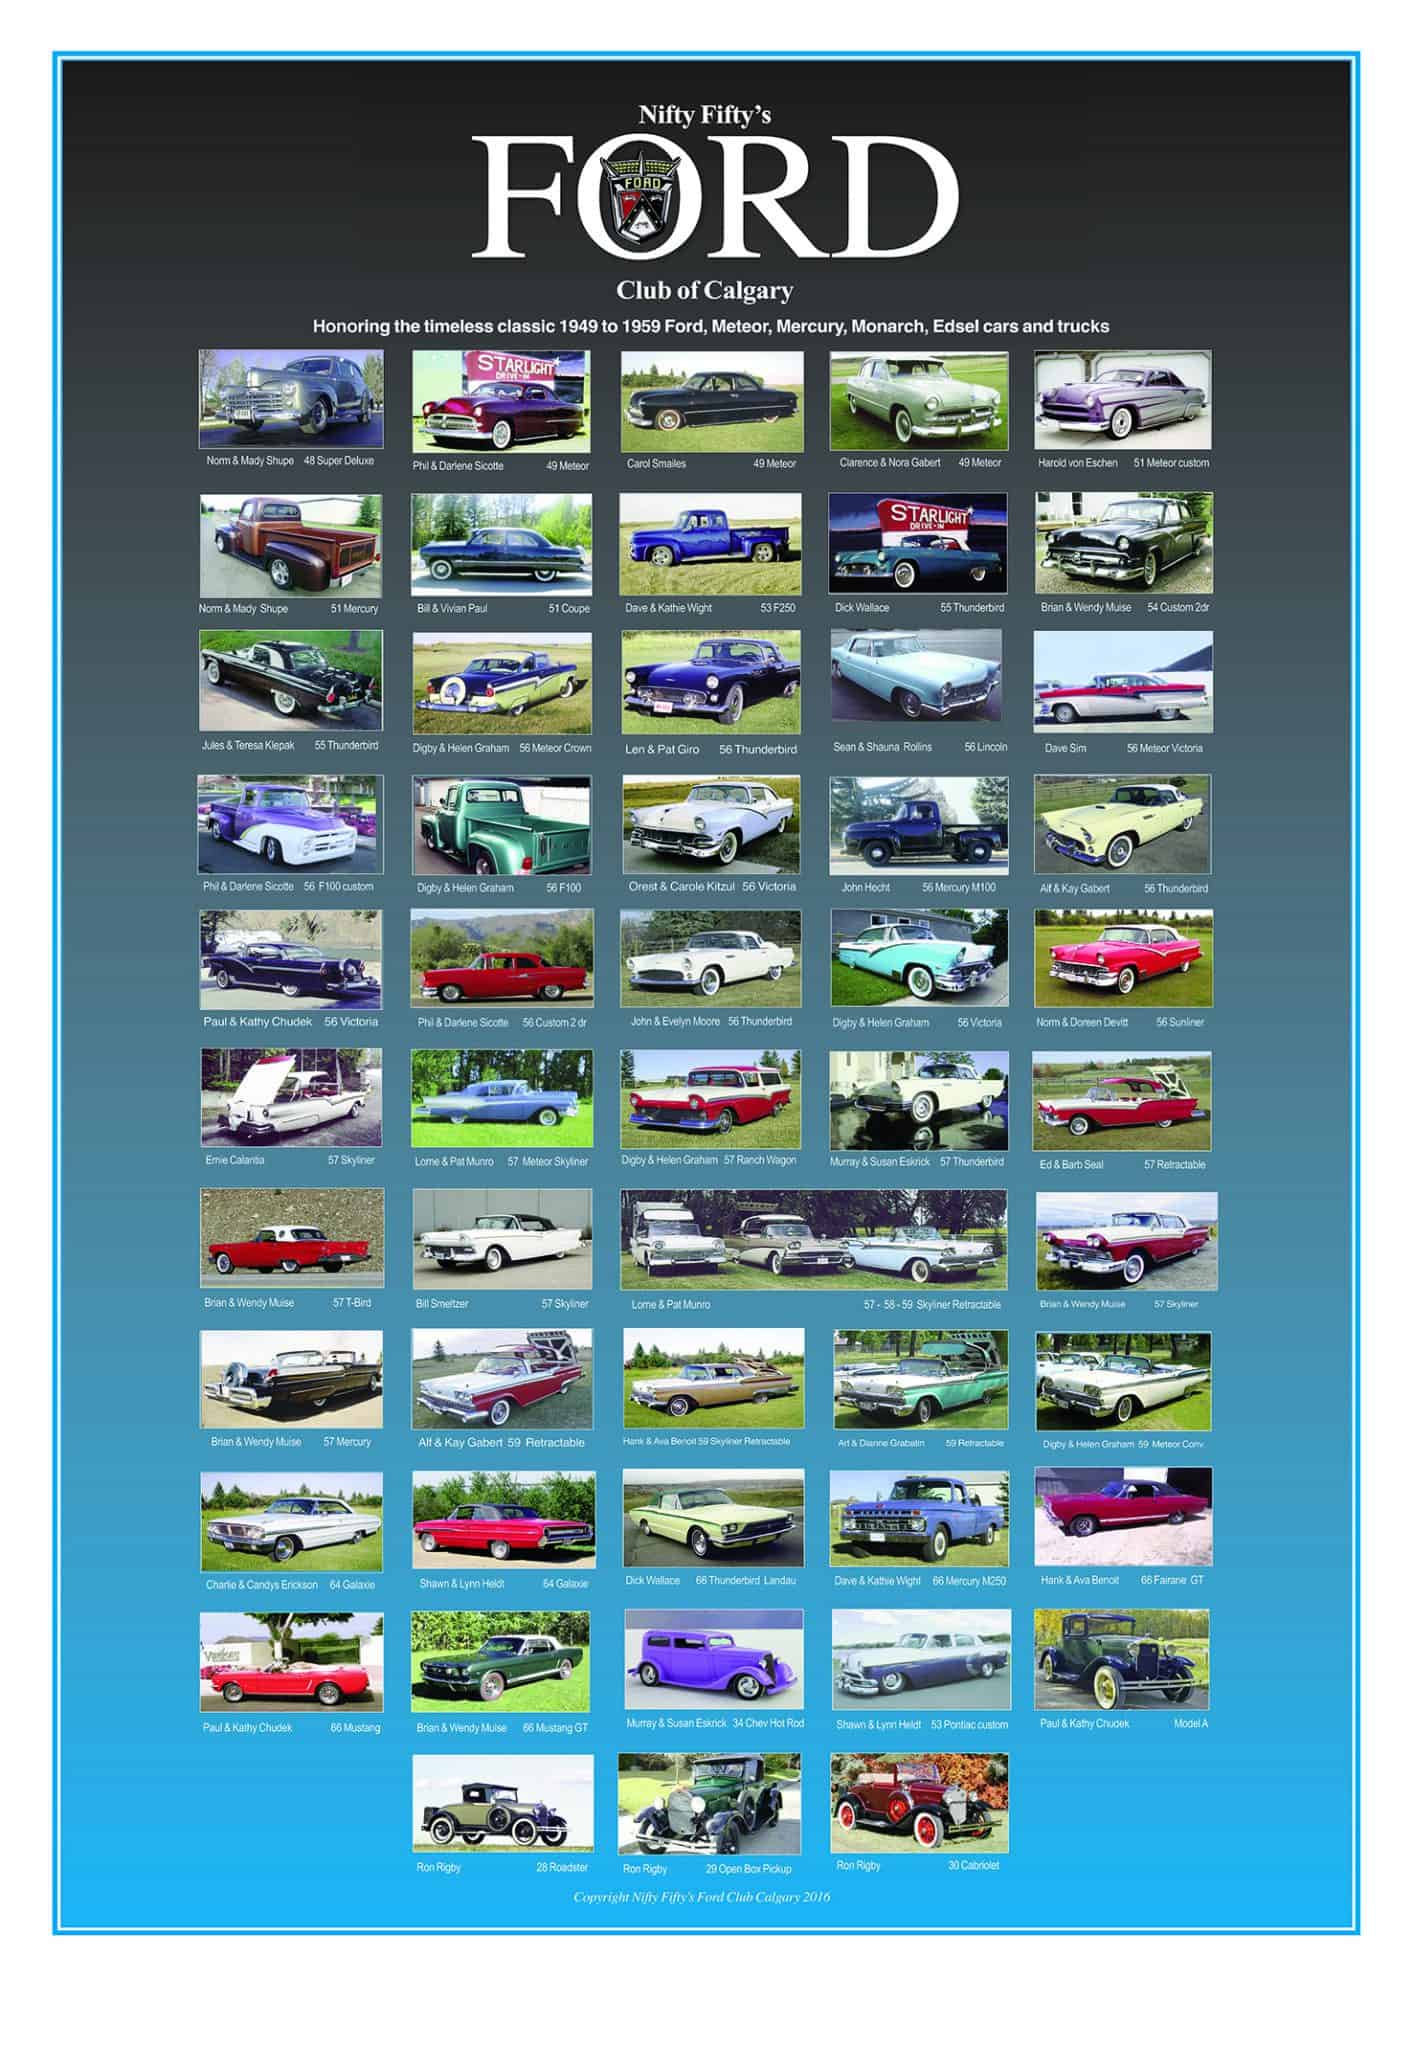 Nifty Fifty's Ford Club Member's Rides Poster